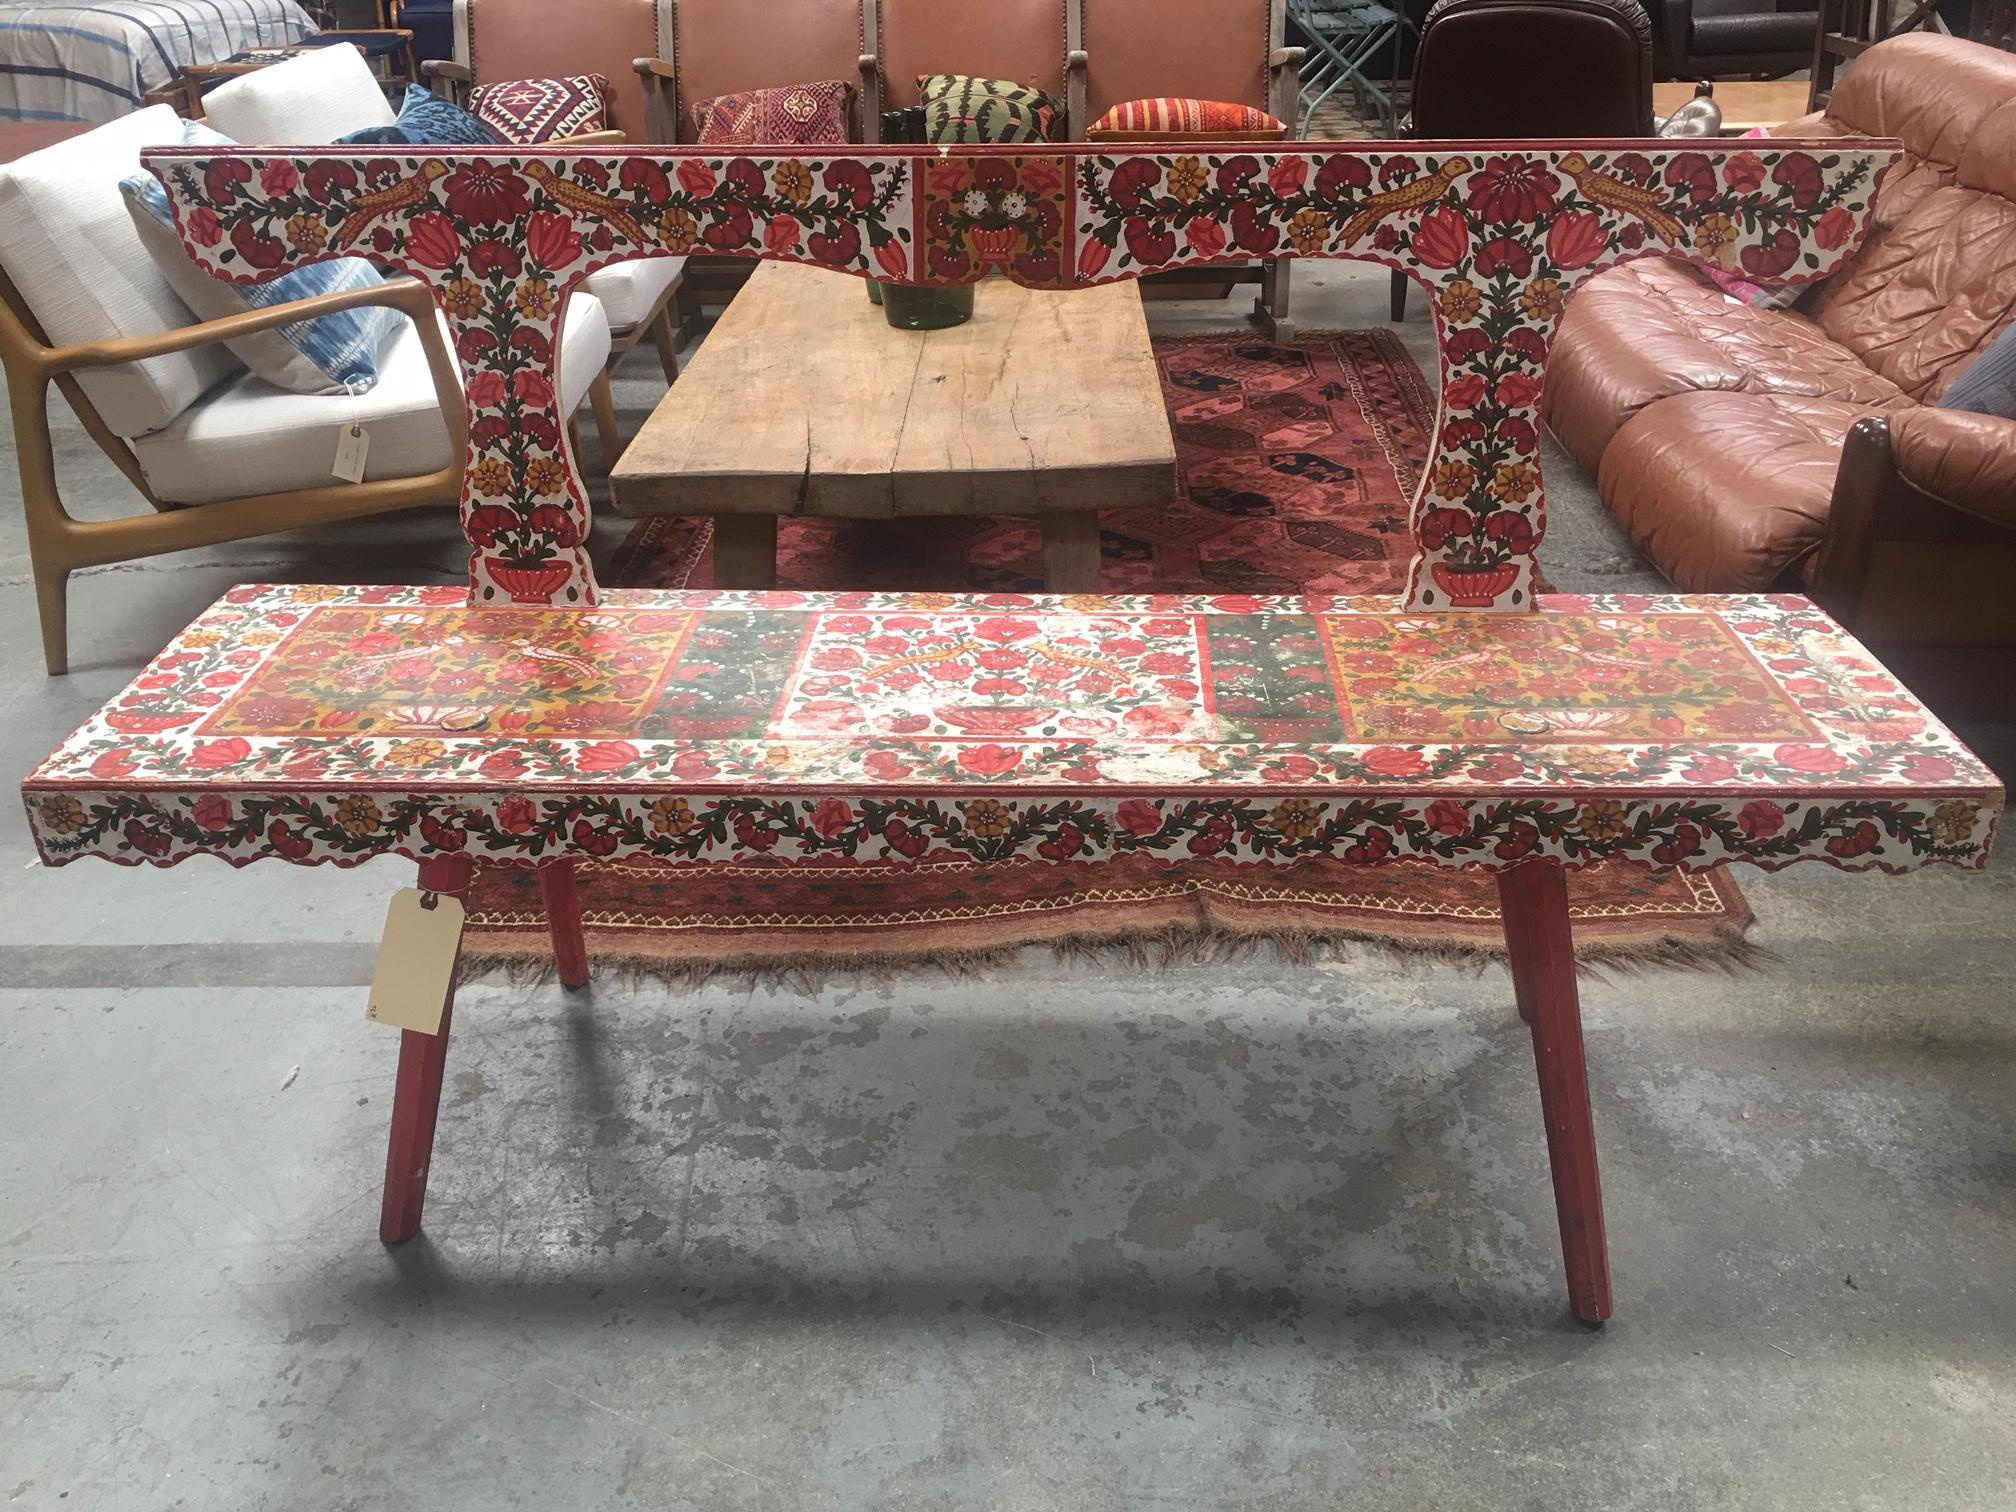 This vintage bench is visually striking and totally one-of-a-kind. The hand painted floral scenes are still in tact and make this a really fun and cheery piece.